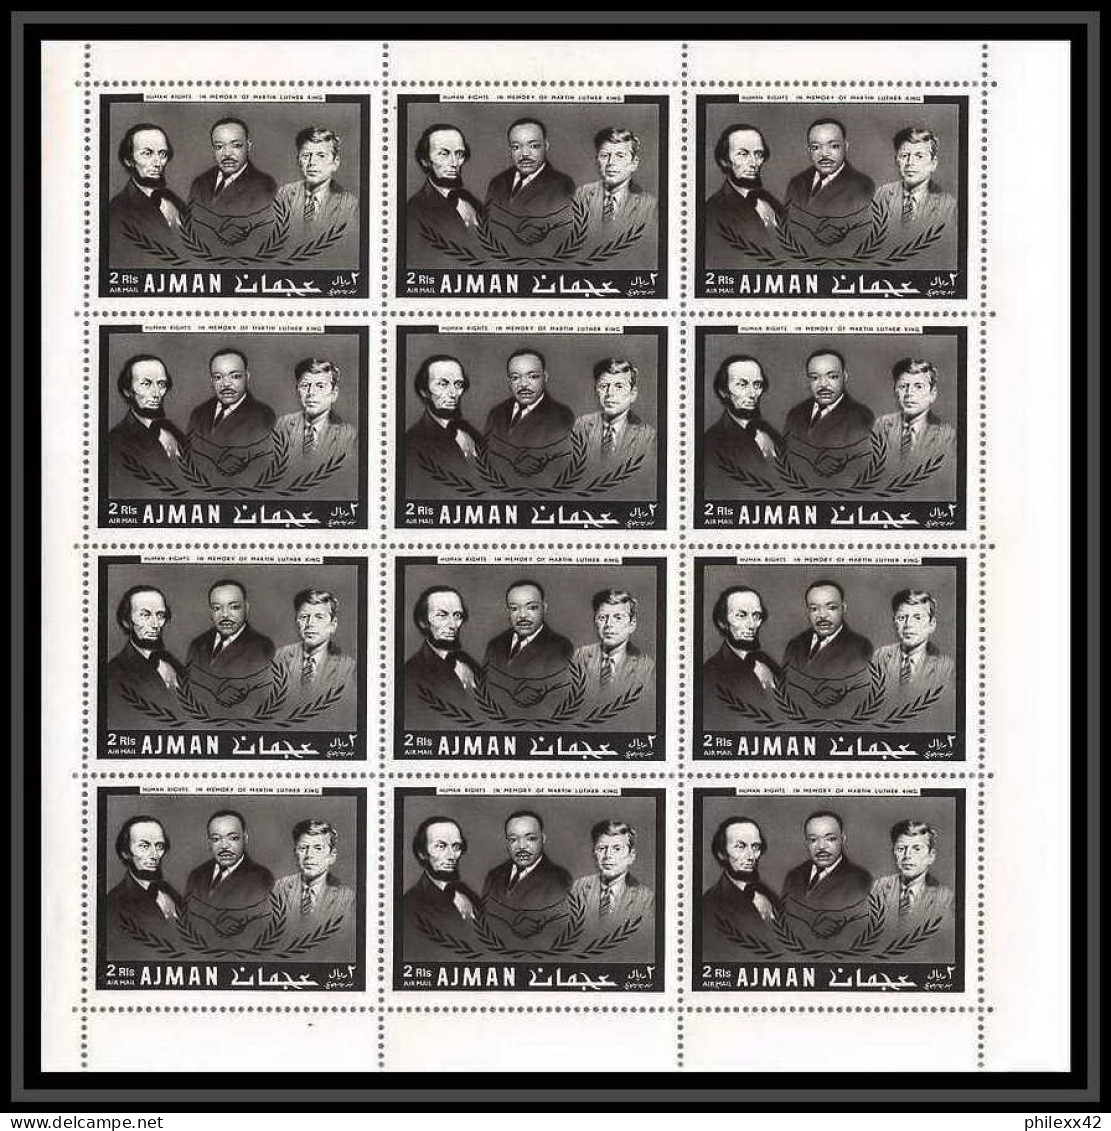 333d - Ajman MNH ** Mi N° 289 / 294 A Year Of Human Righrs Kennedy Martin Luther King Abraham Lincoln Feuilles (sheets) - Kennedy (John F.)